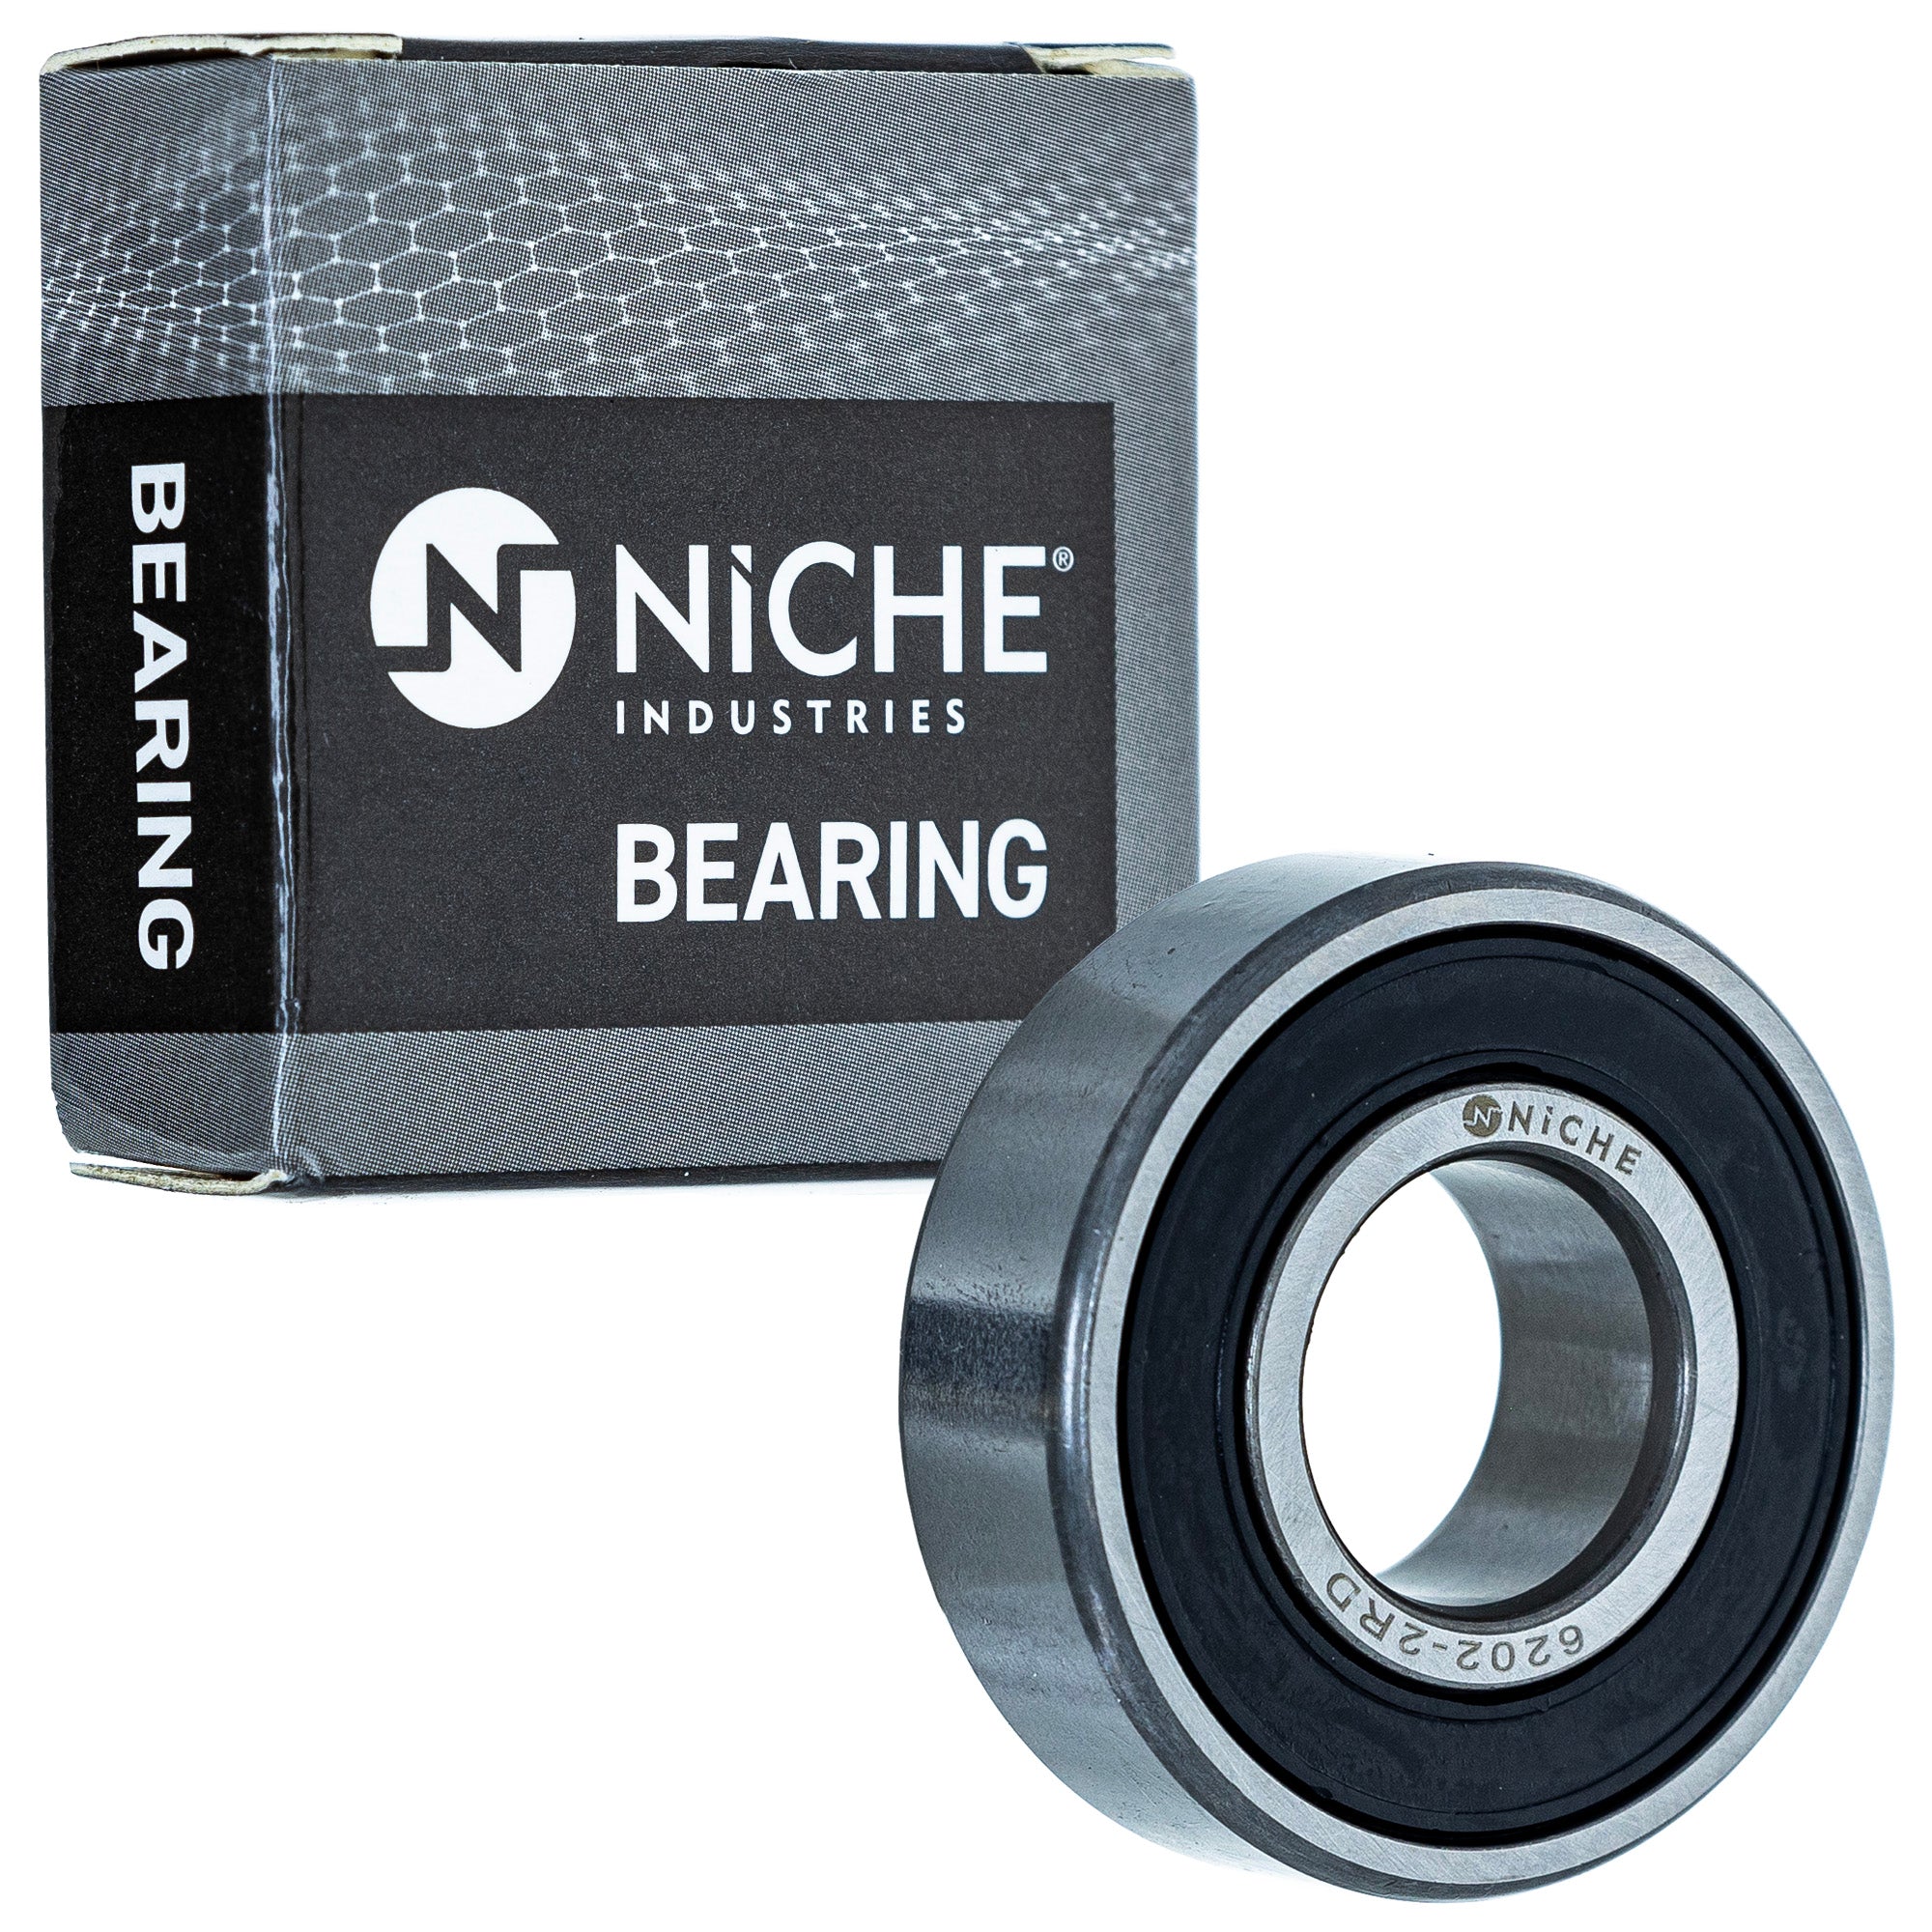 NICHE 519-CBB2252R Bearing 2-Pack for zOTHER Xpress Xplorer Xpedition